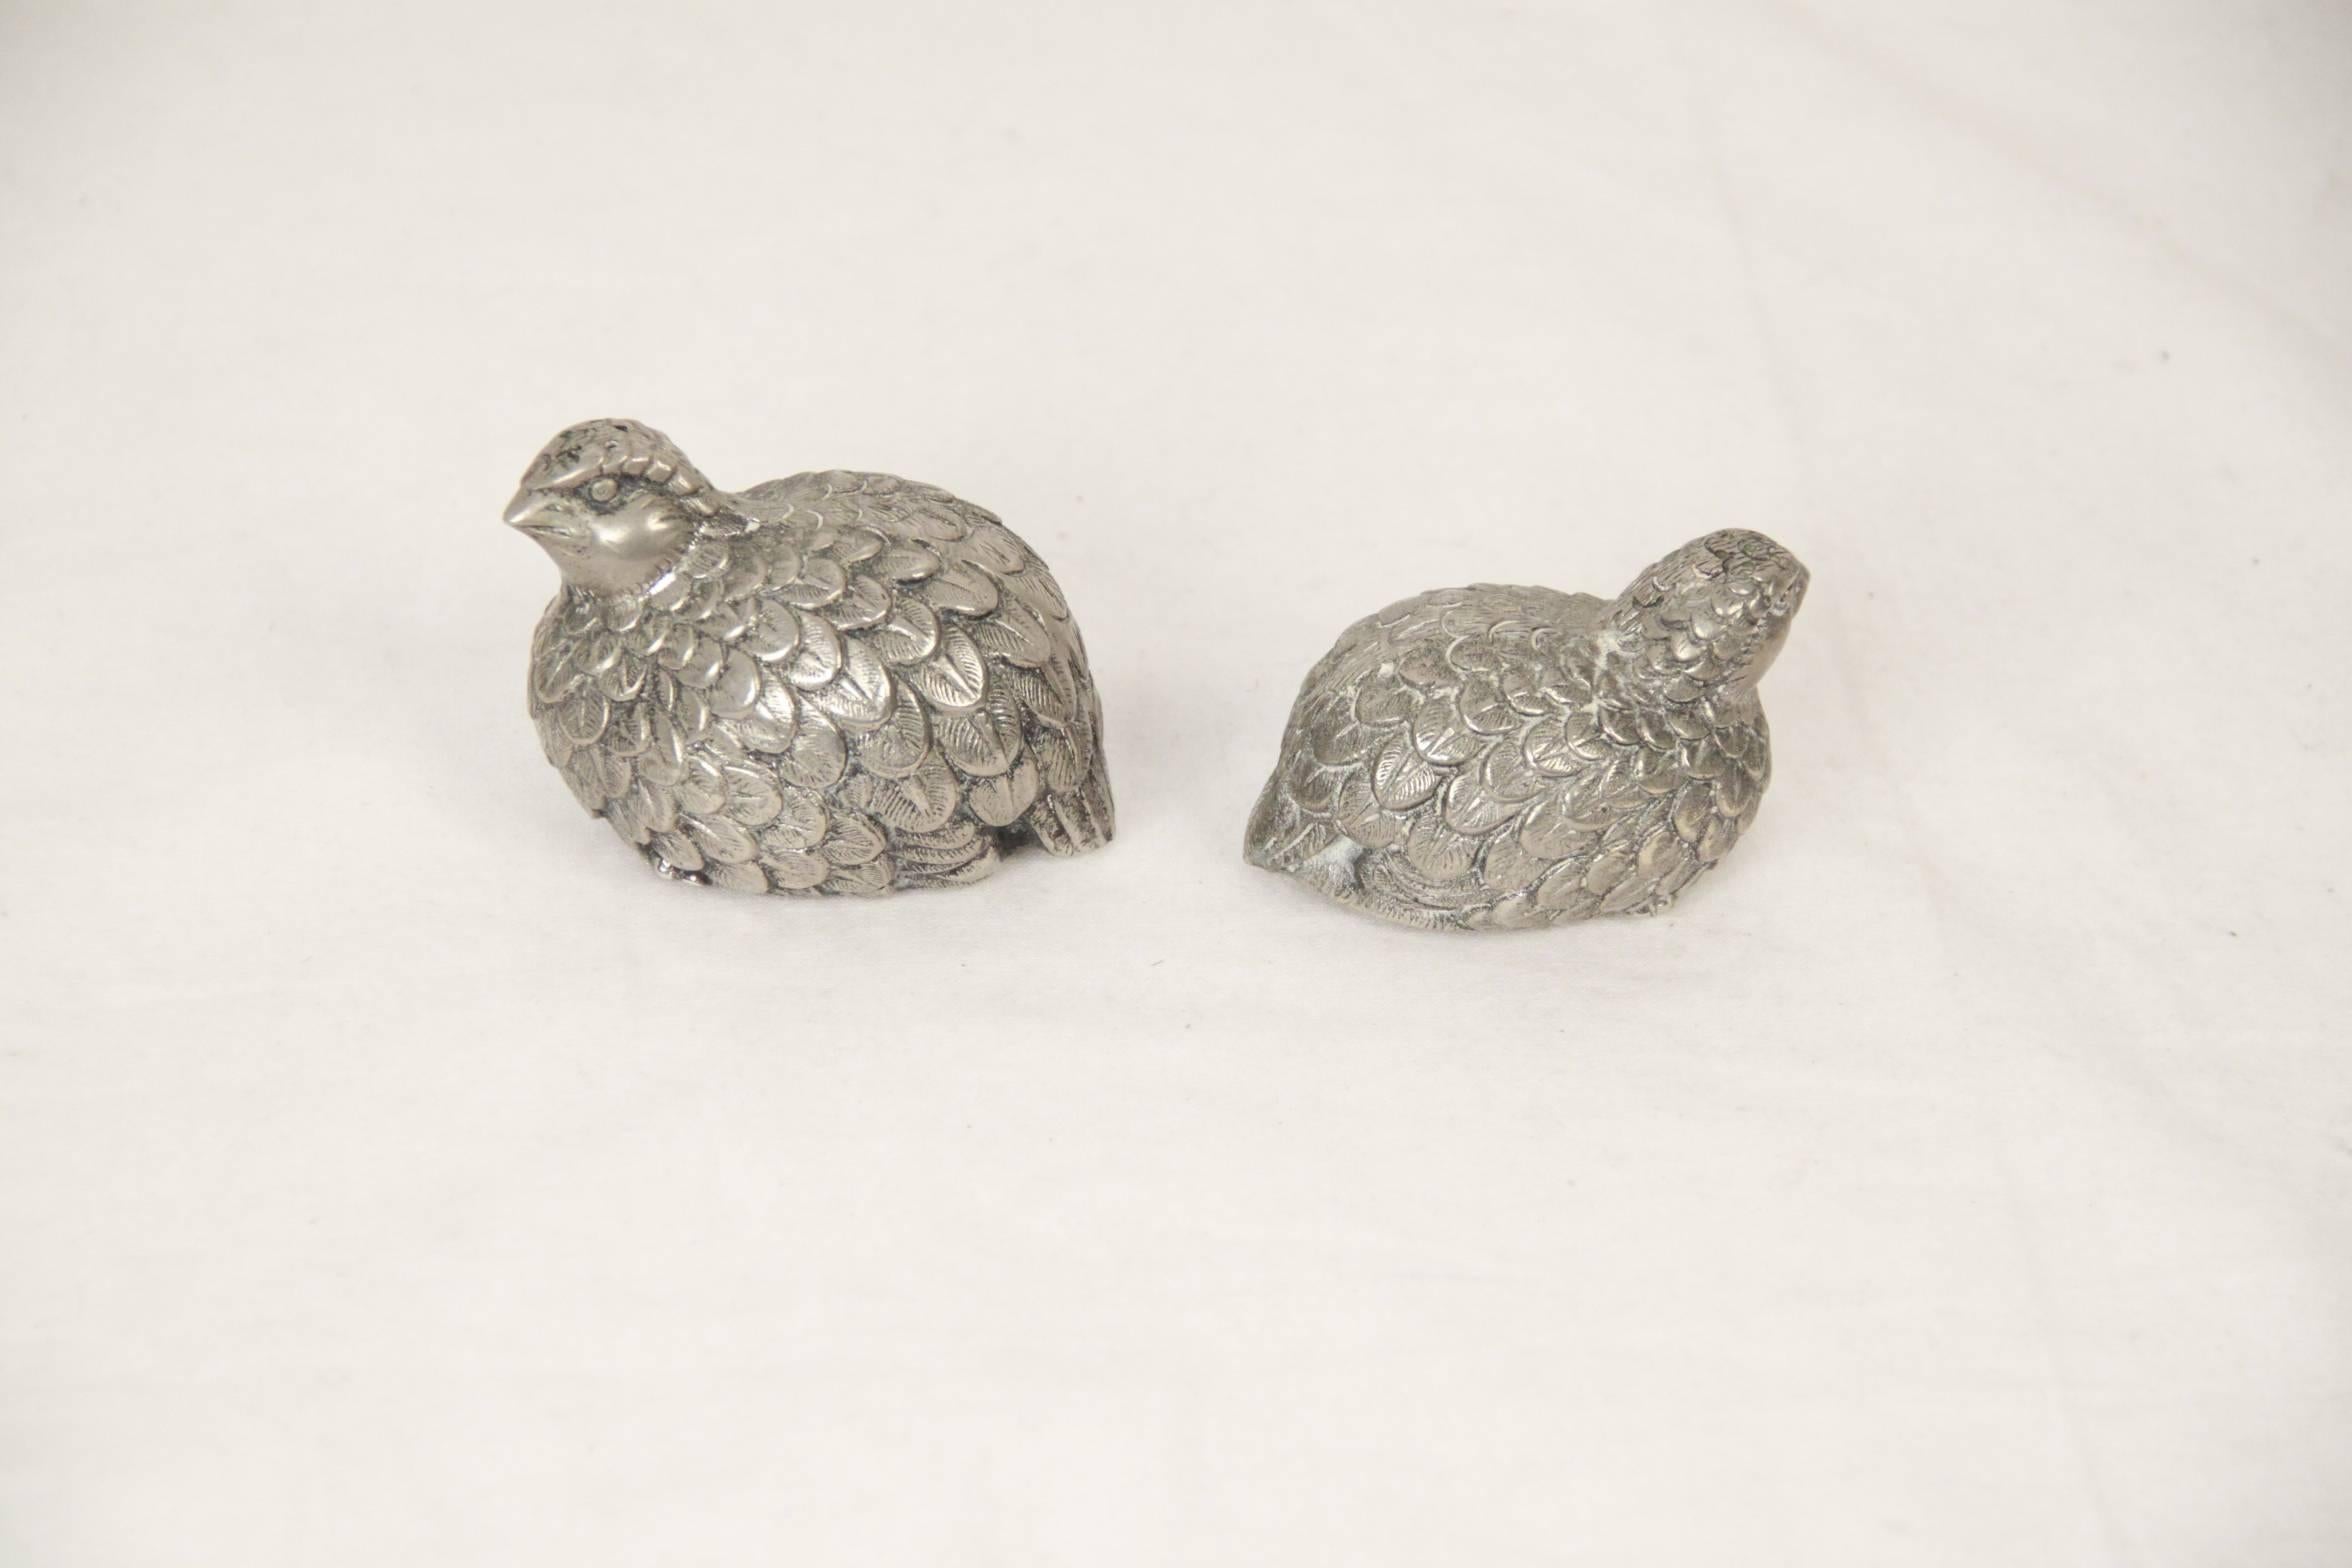 Silver metal GUCCI figural quail salt & pepper shakers, engraved details. Heavy metal. One is larger than the other. Both still have the plastic stoppers on the base.
LARGER QUAIL (height): 2 inches - 5,1 cm / (lenght): 2 3/4 inches - 7